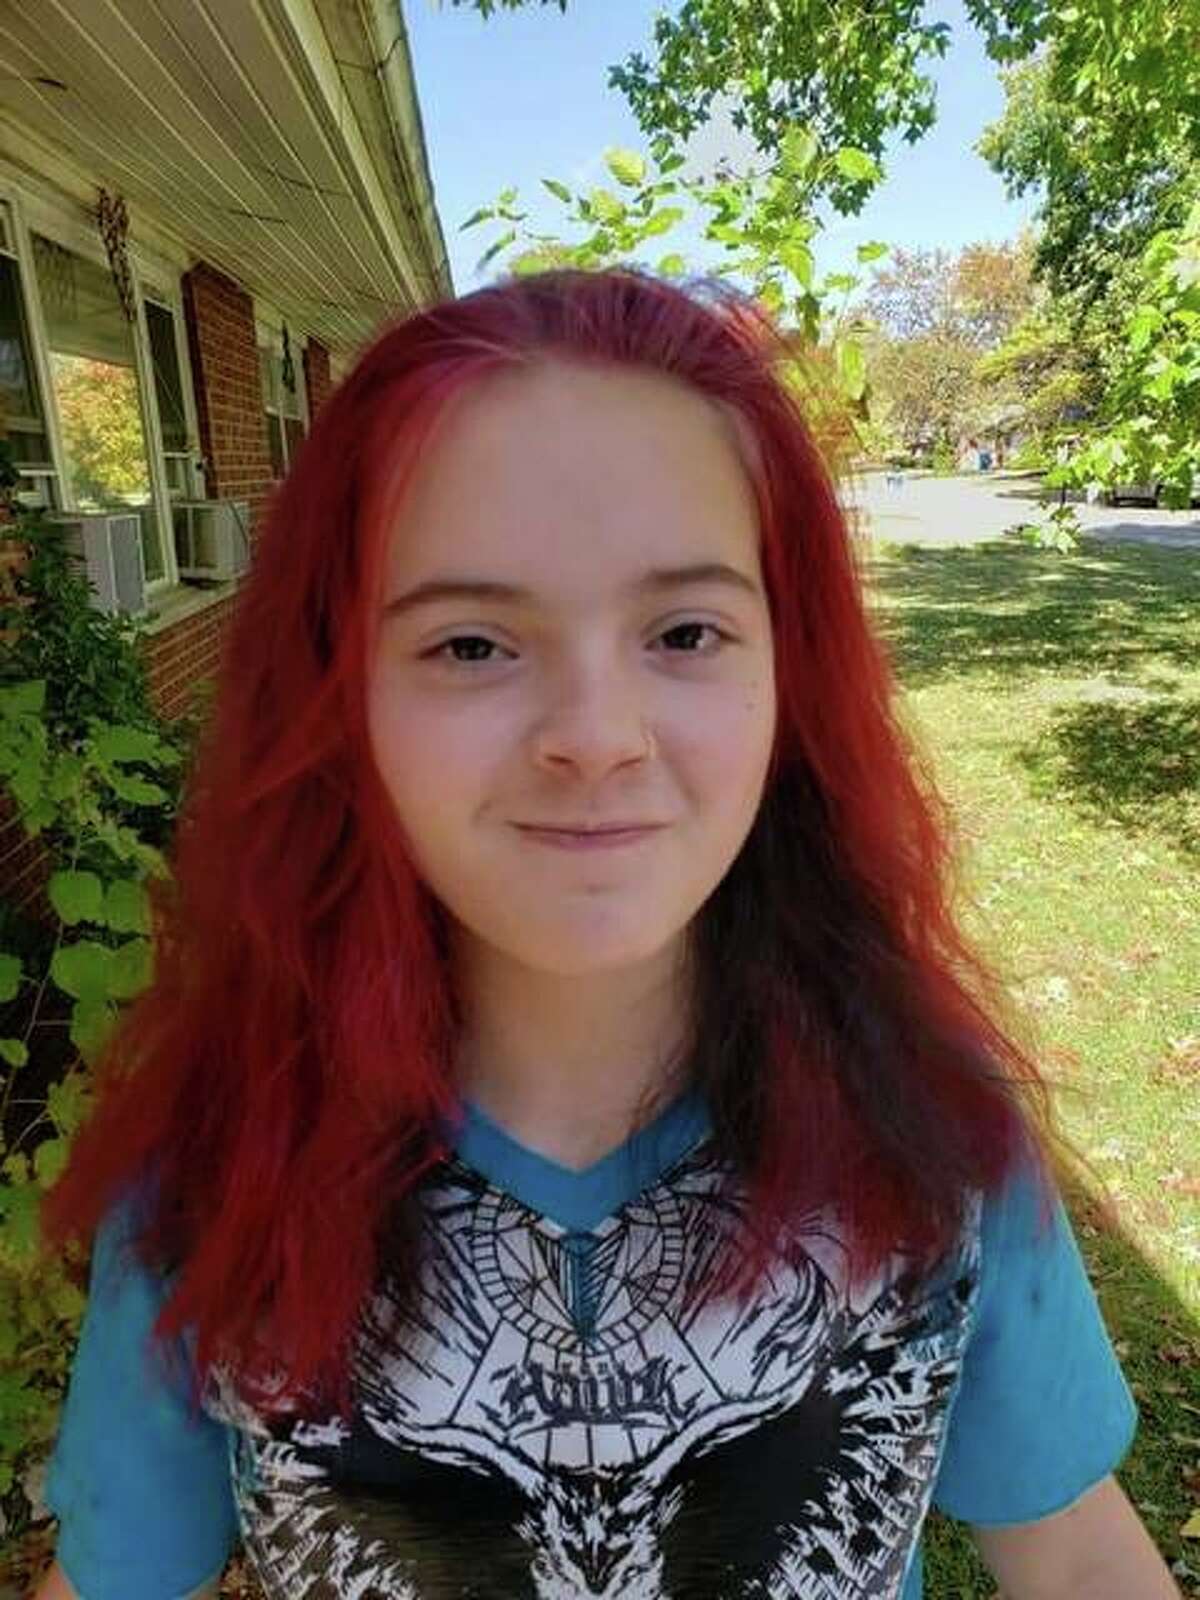 Located Safe Wood River 14 Year Old Girl Missing Police Seek Publics Help 7616